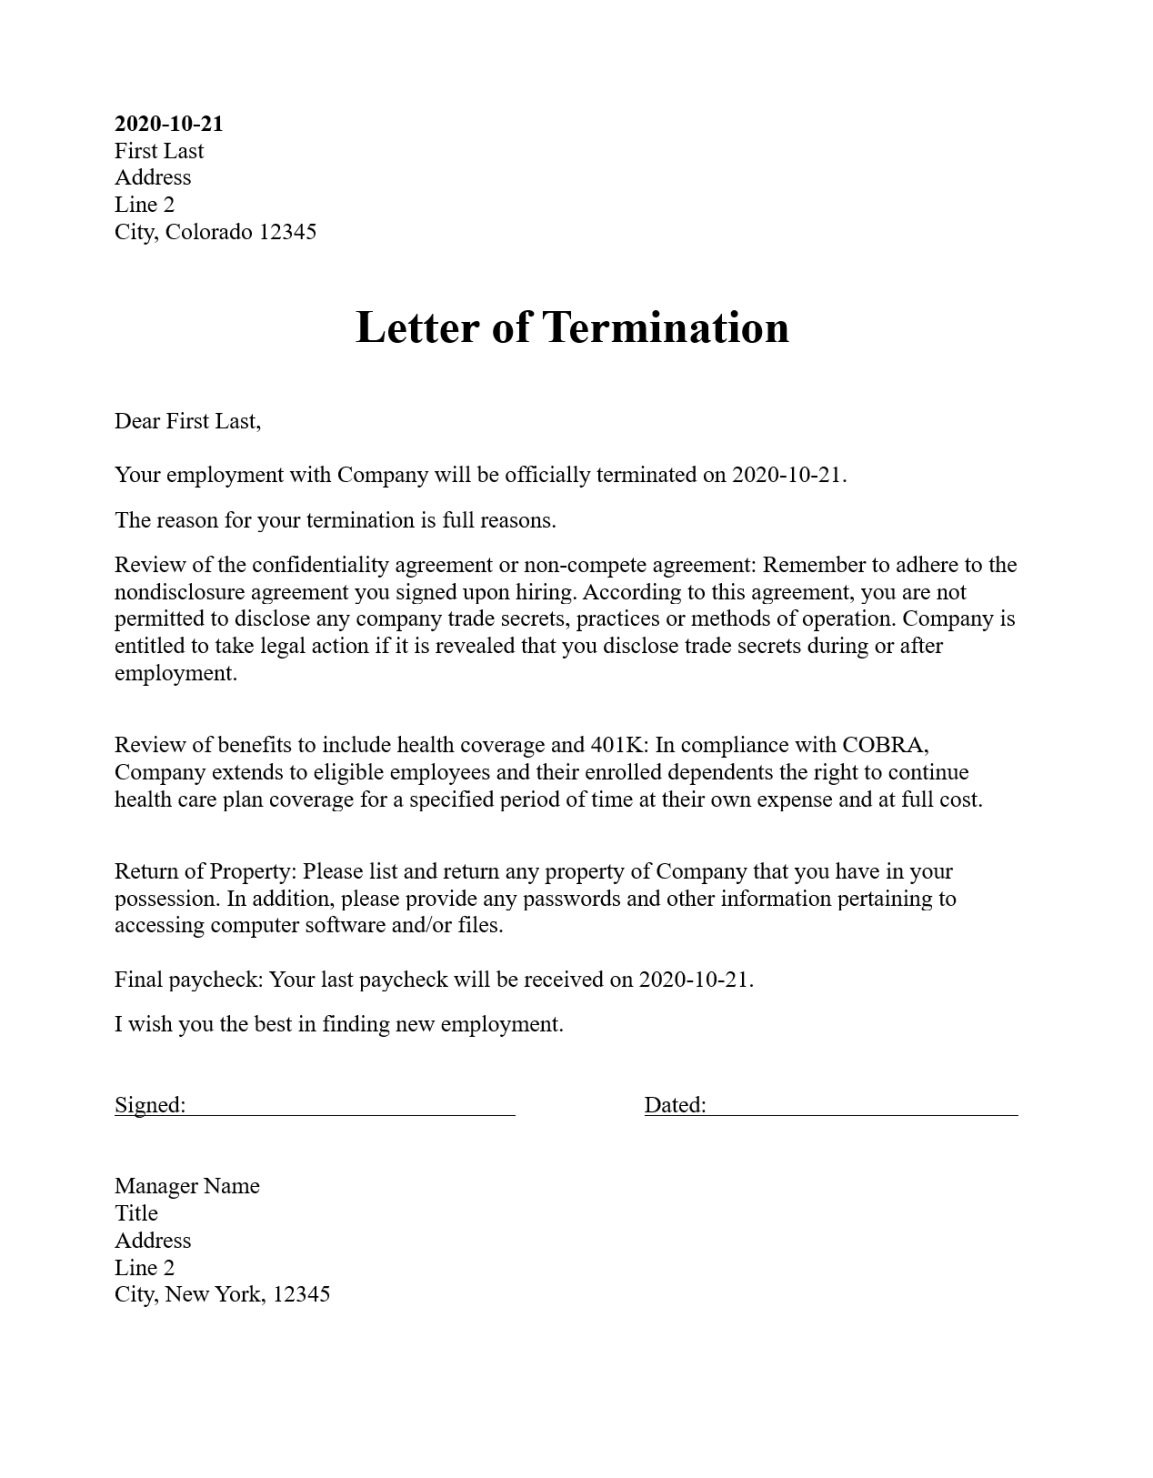 Perfect Termination Letter Samples [Lease, Employee, Contract]